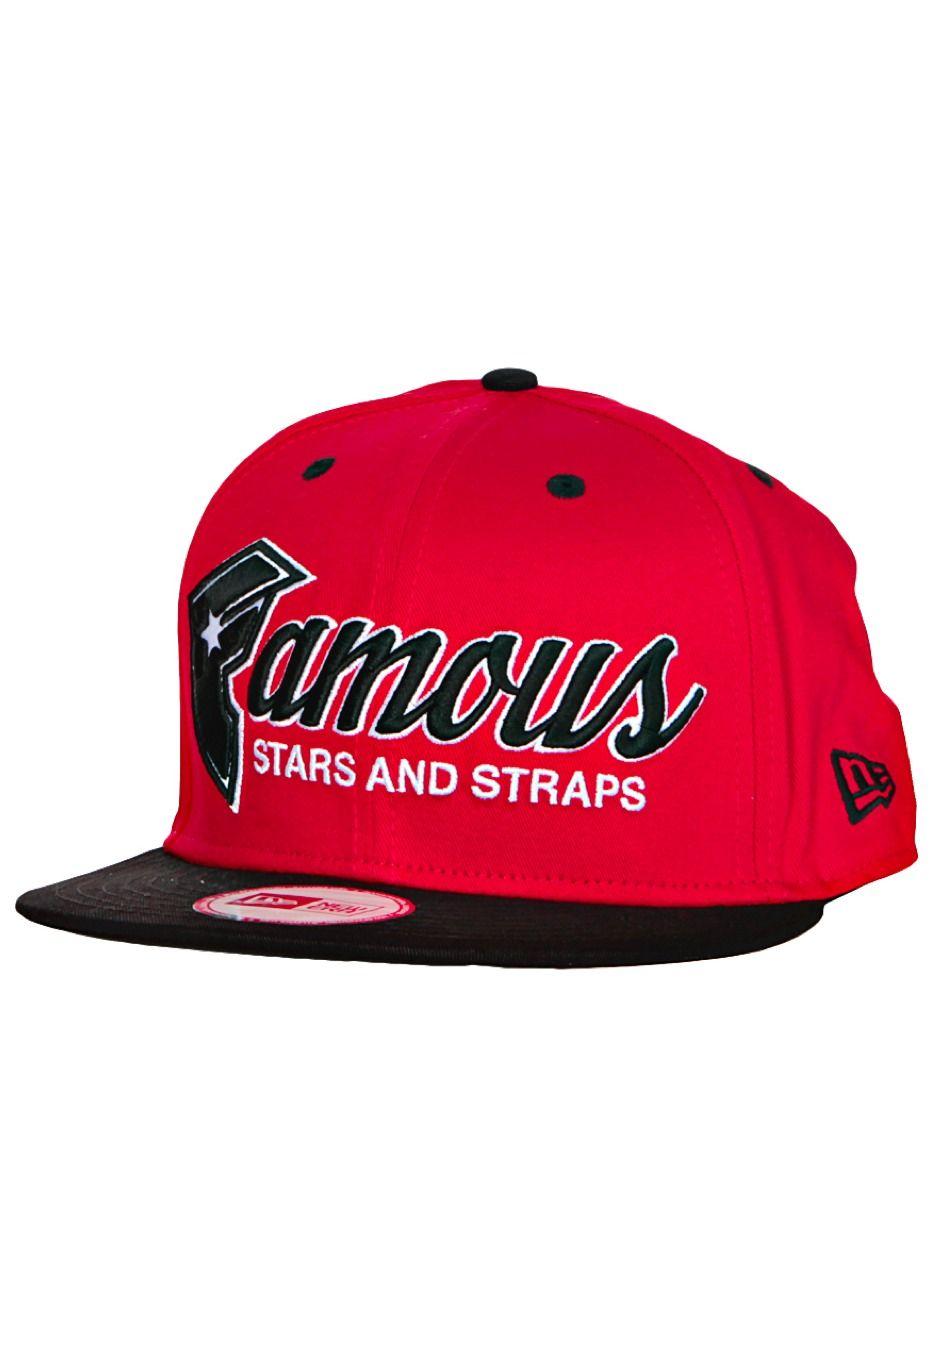 Red and Blqck Famous Logo - Famous Stars And Straps - Fast Break New Era Red/Black Snapback ...